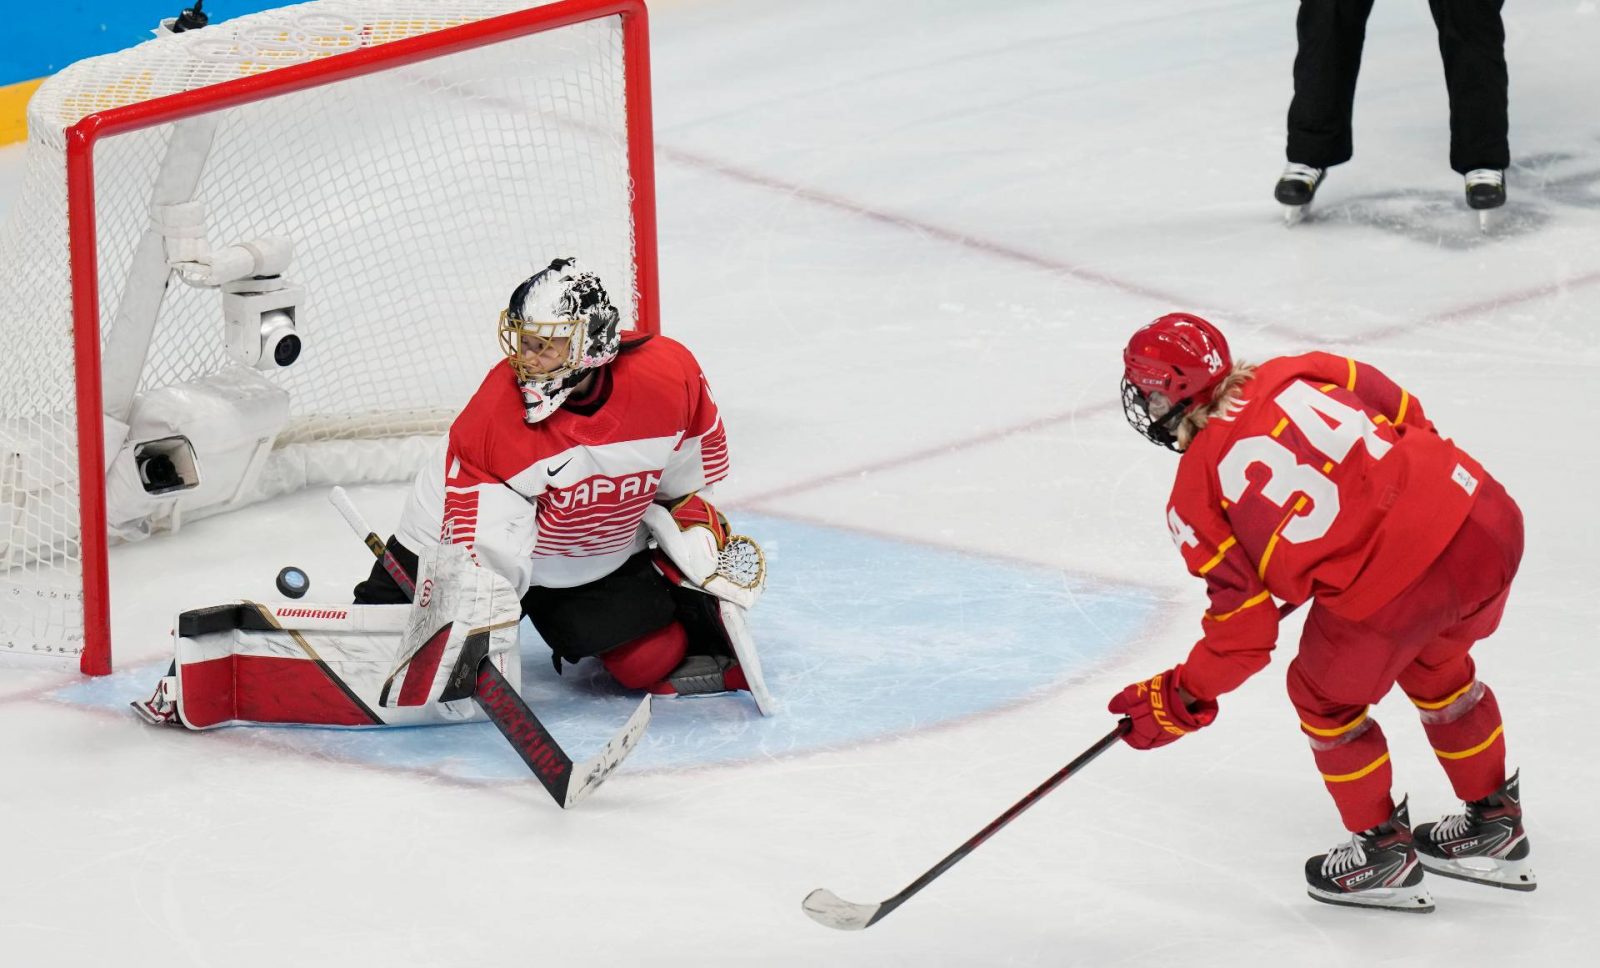 Chinese hockey team loses 1st trial game for Olympics in OT